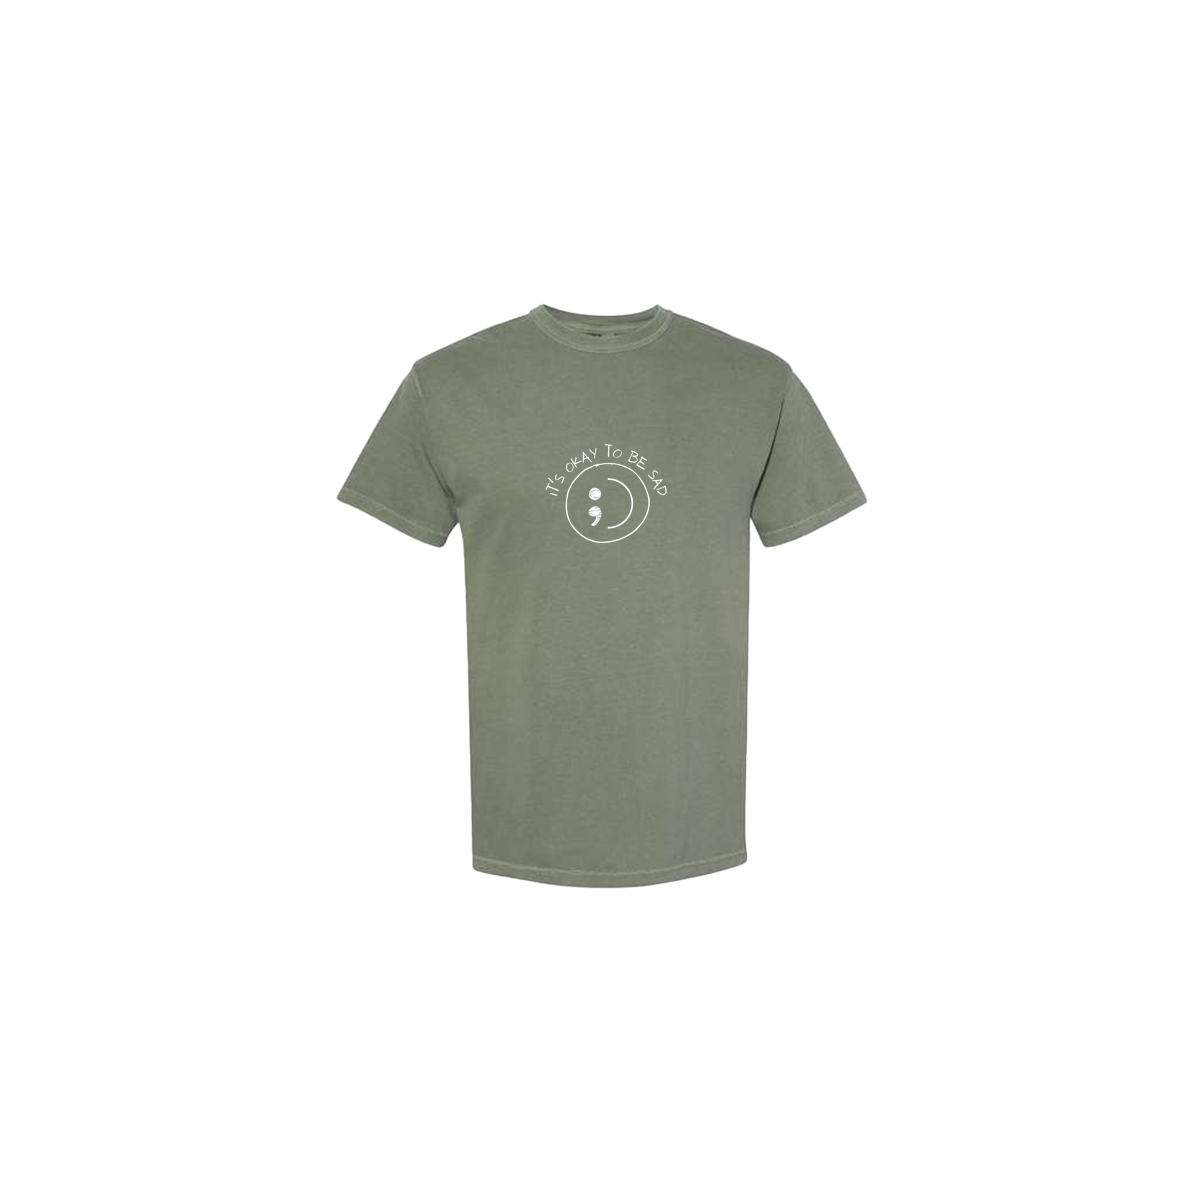 It's Okay to be Sad Embroidered Army Green Tshirt - Mental Health Awareness Clothing